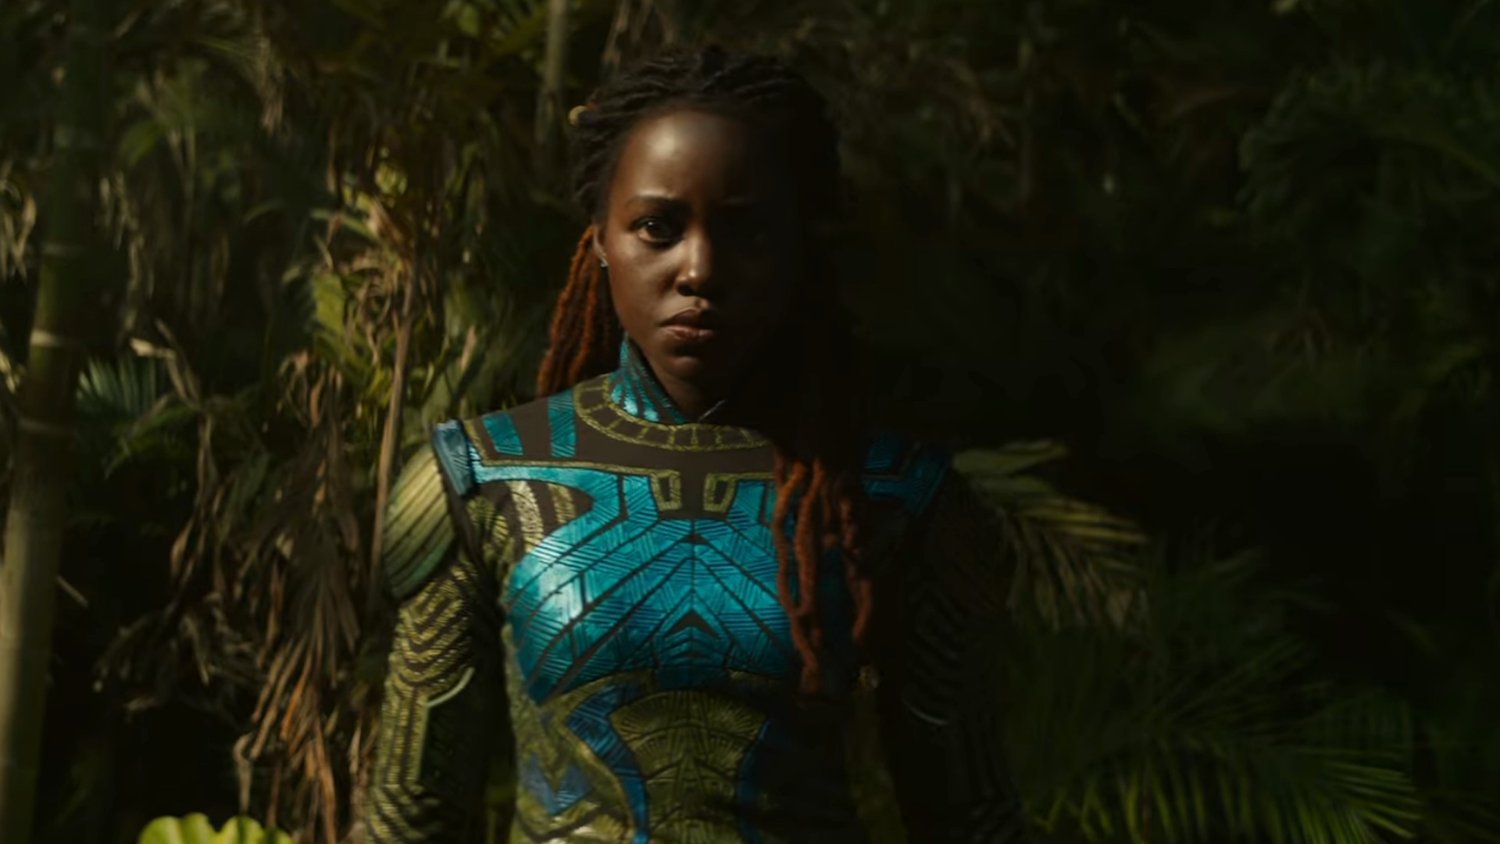 Lupita Nyong’o Reportedly in Talks For Lead Role in Disney’s Live-Action Remake of THE PRINCESS AND THE FROG